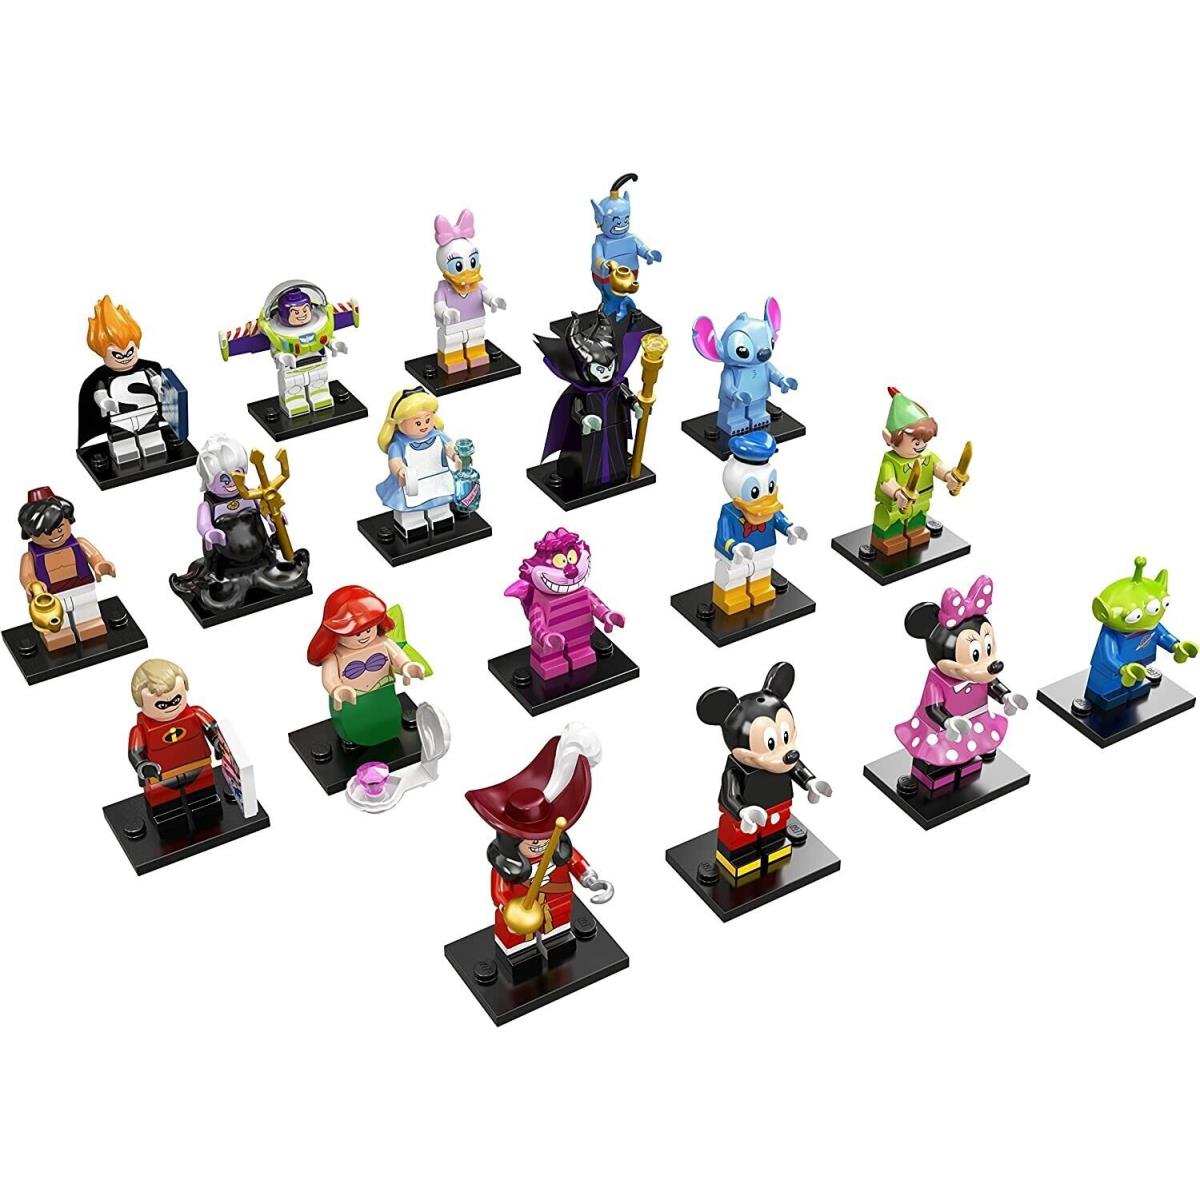 Lego Disney Series 1 Collectible Minifigure Series - Complete Set of 18 71012